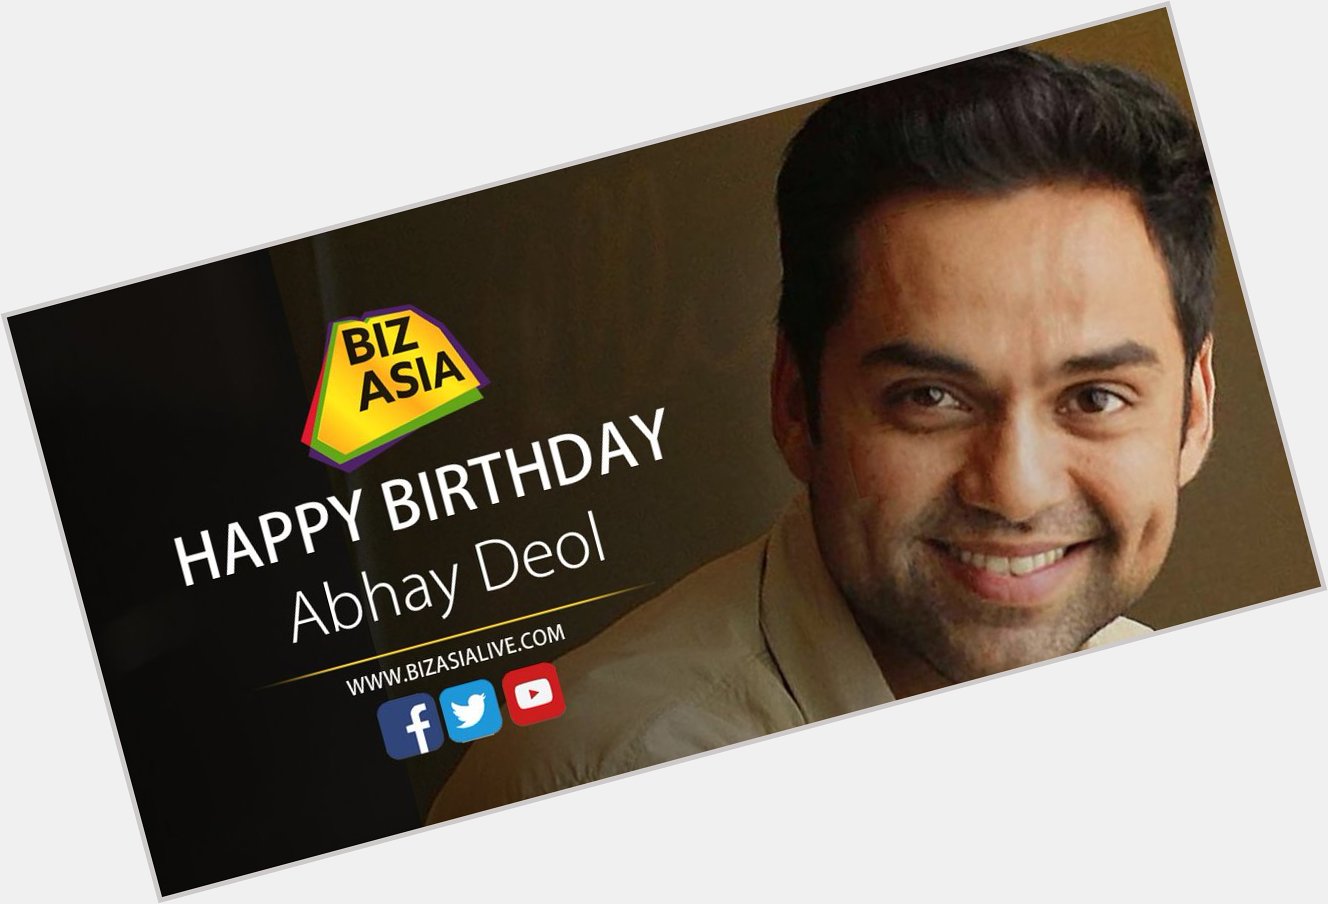  wishes Abhay Deol a very happy birthday.  